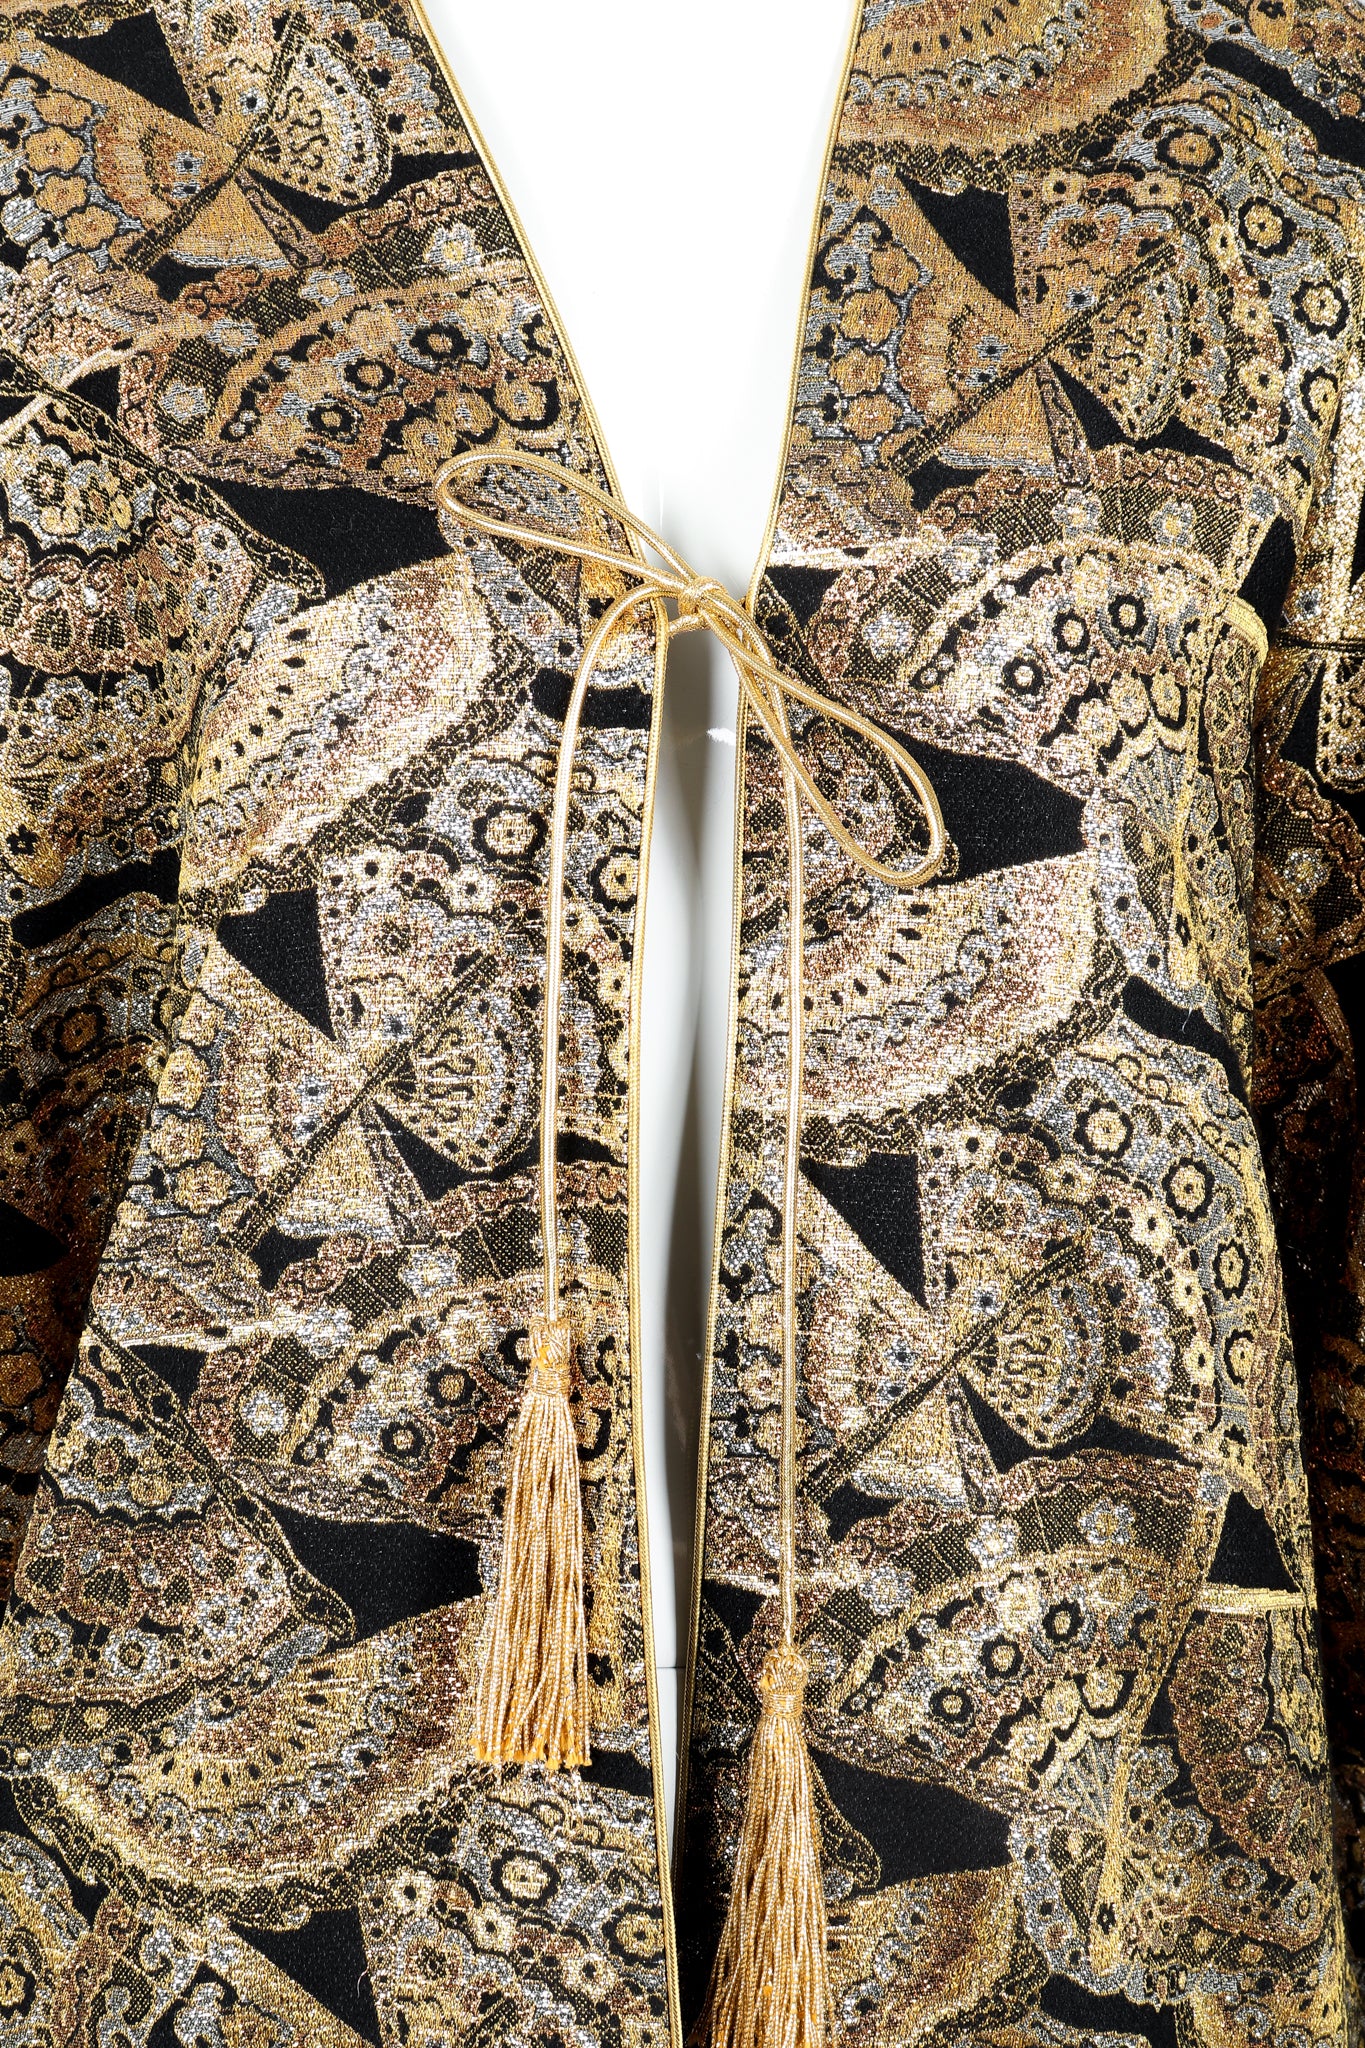 Vintage Anthony Muto Golden Brocade Fan Coccon Coat on Mannequin tassel tie at Recess